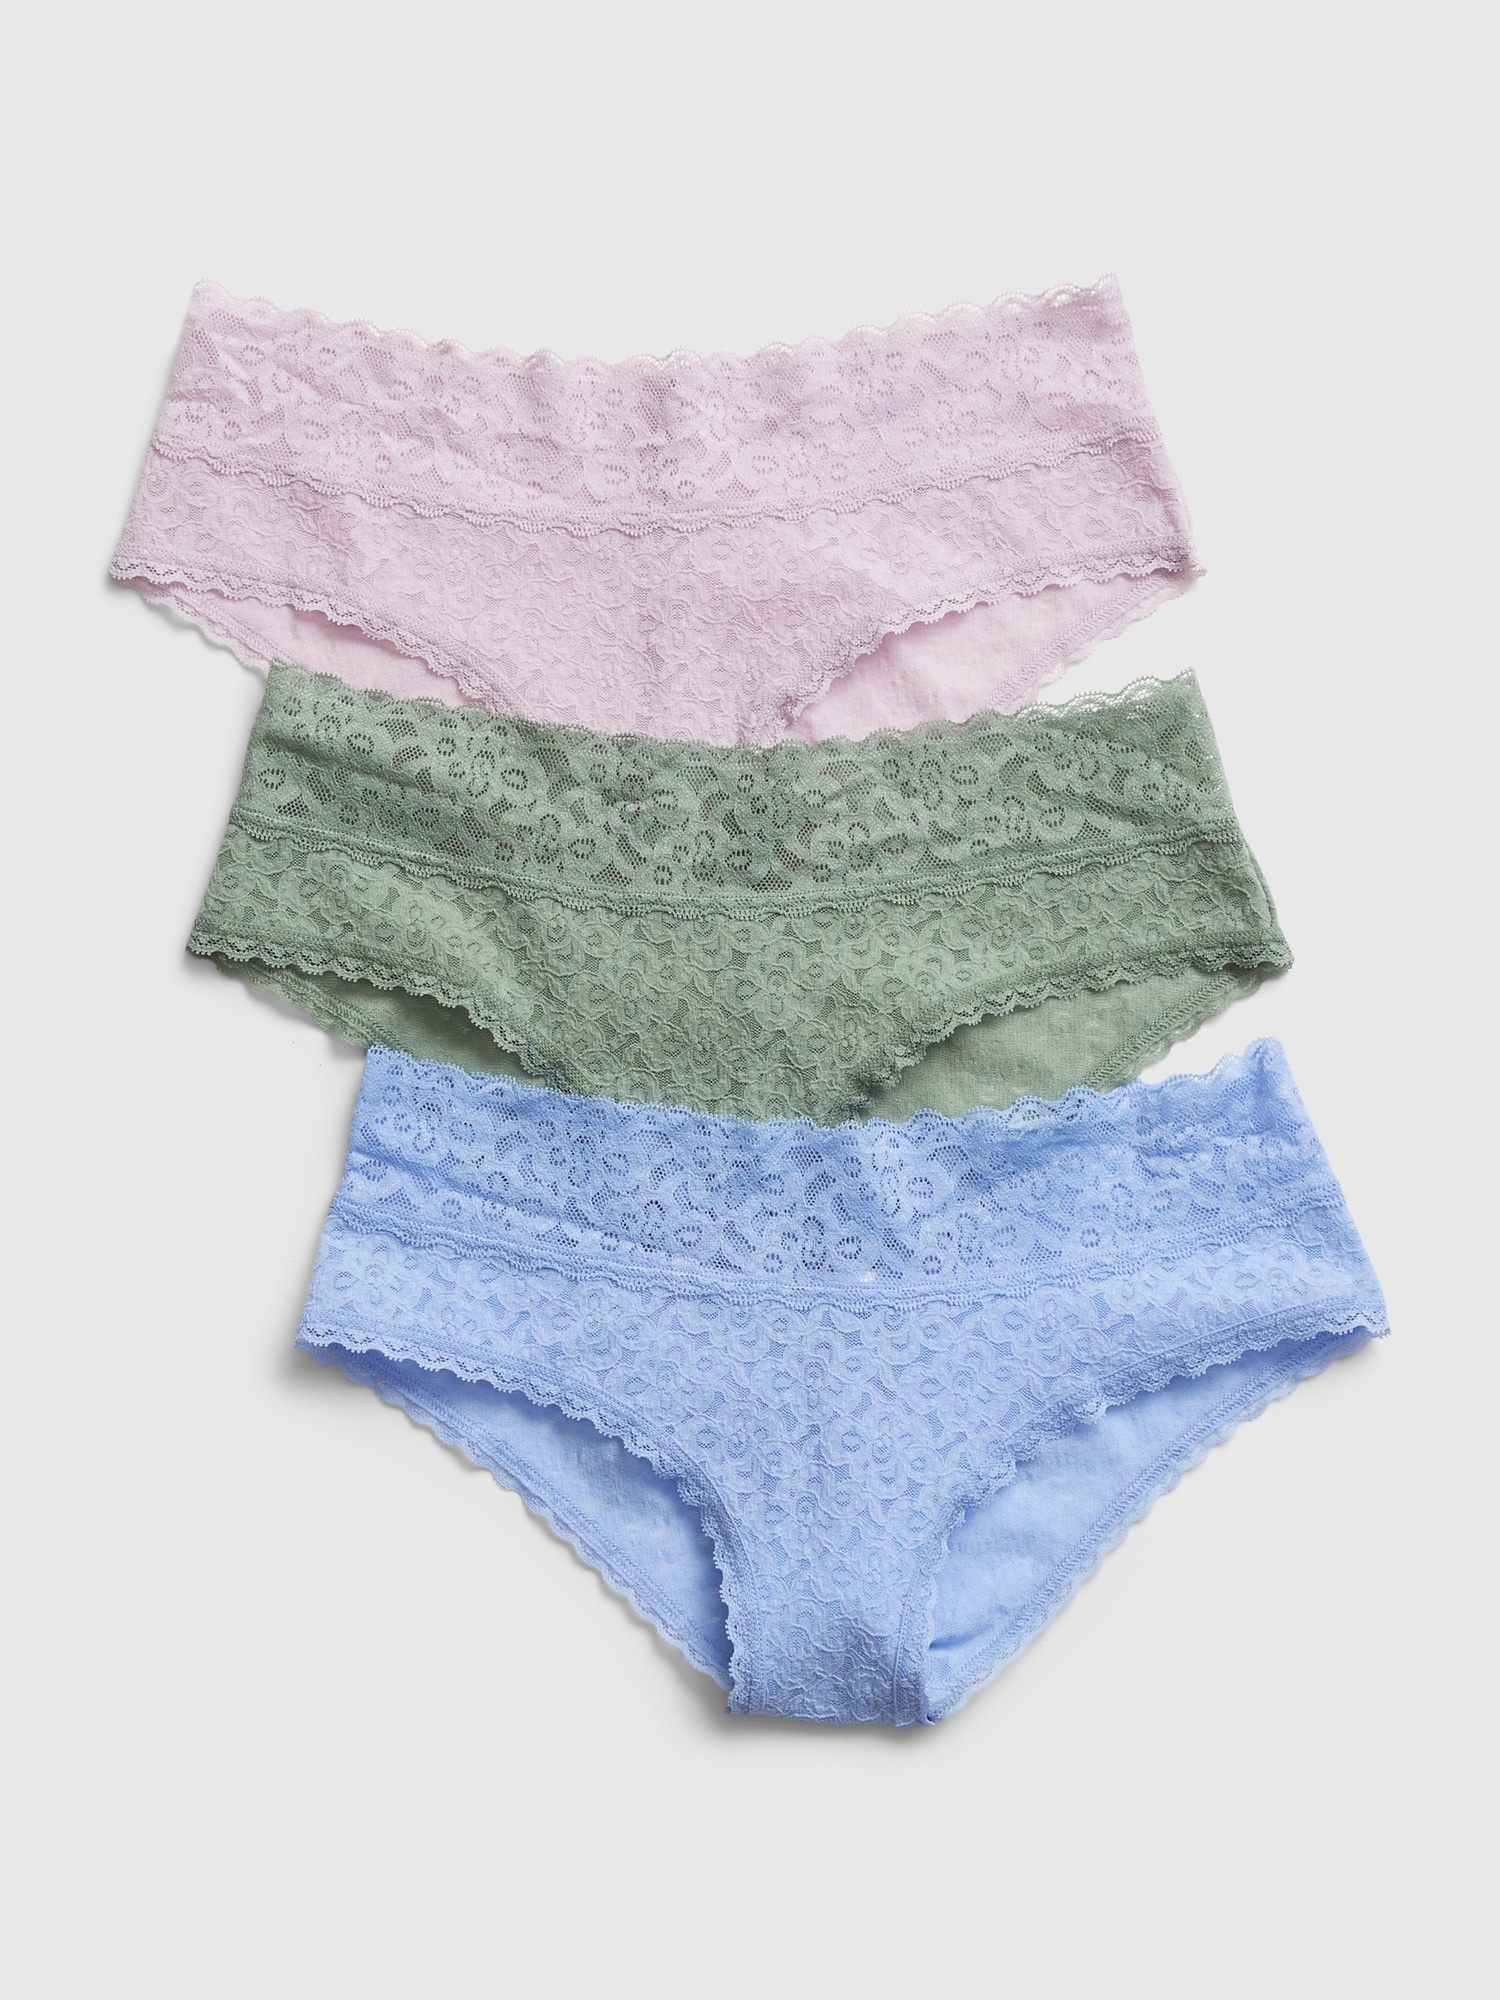 Gap Lace Cheeky (3-pack) In Purple Lilac/ Sage Green/ & Light Blue